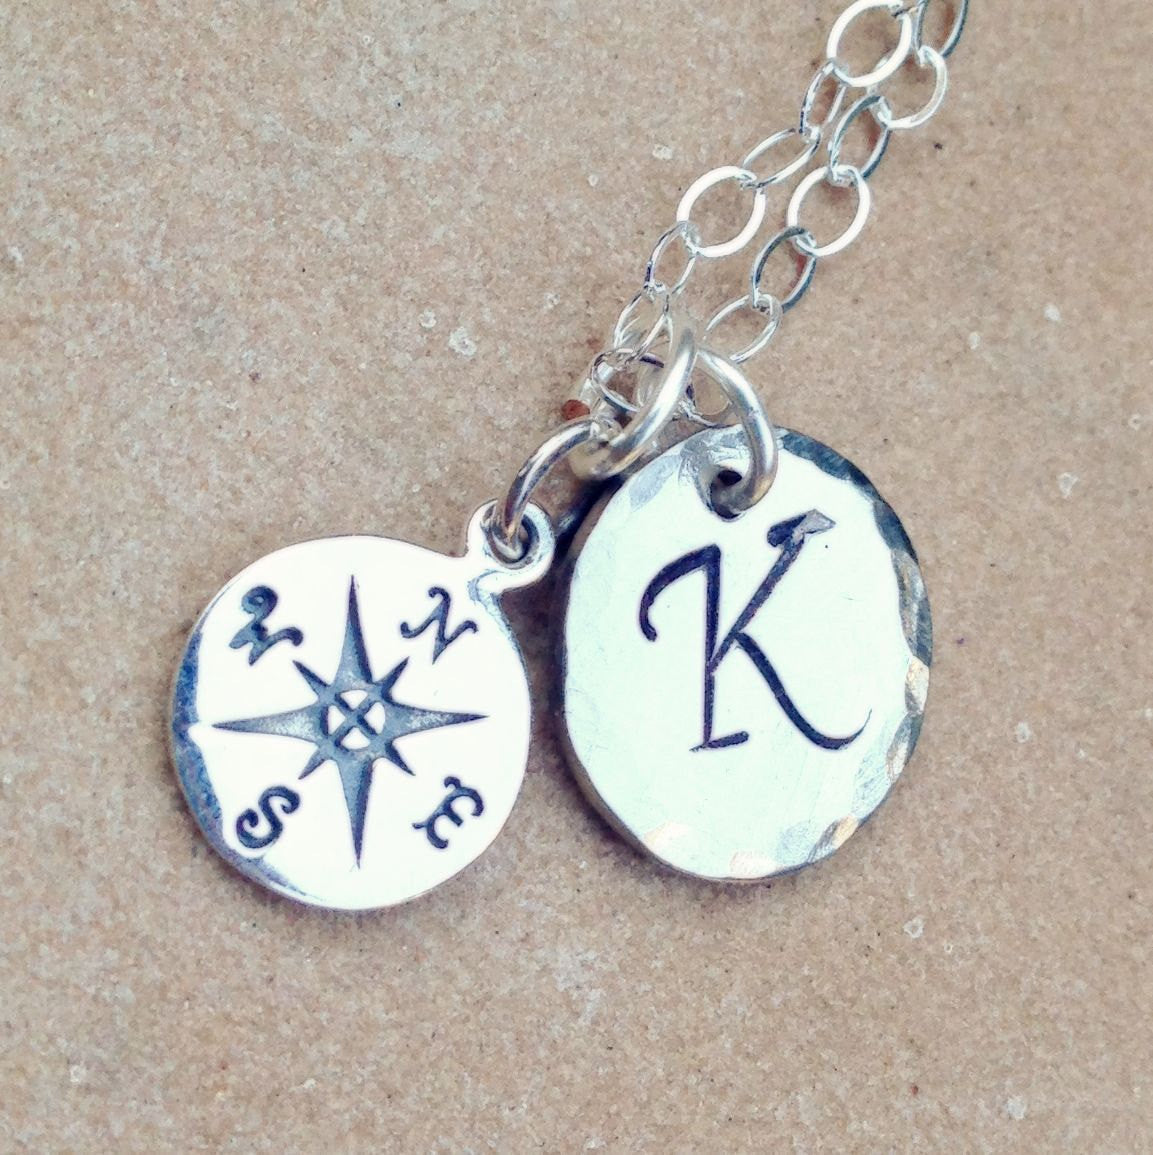 Personalized Compass Necklace - Natashaaloha, jewelry, bracelets, necklace, keychains, fishing lures, gifts for men, charms, personalized, 